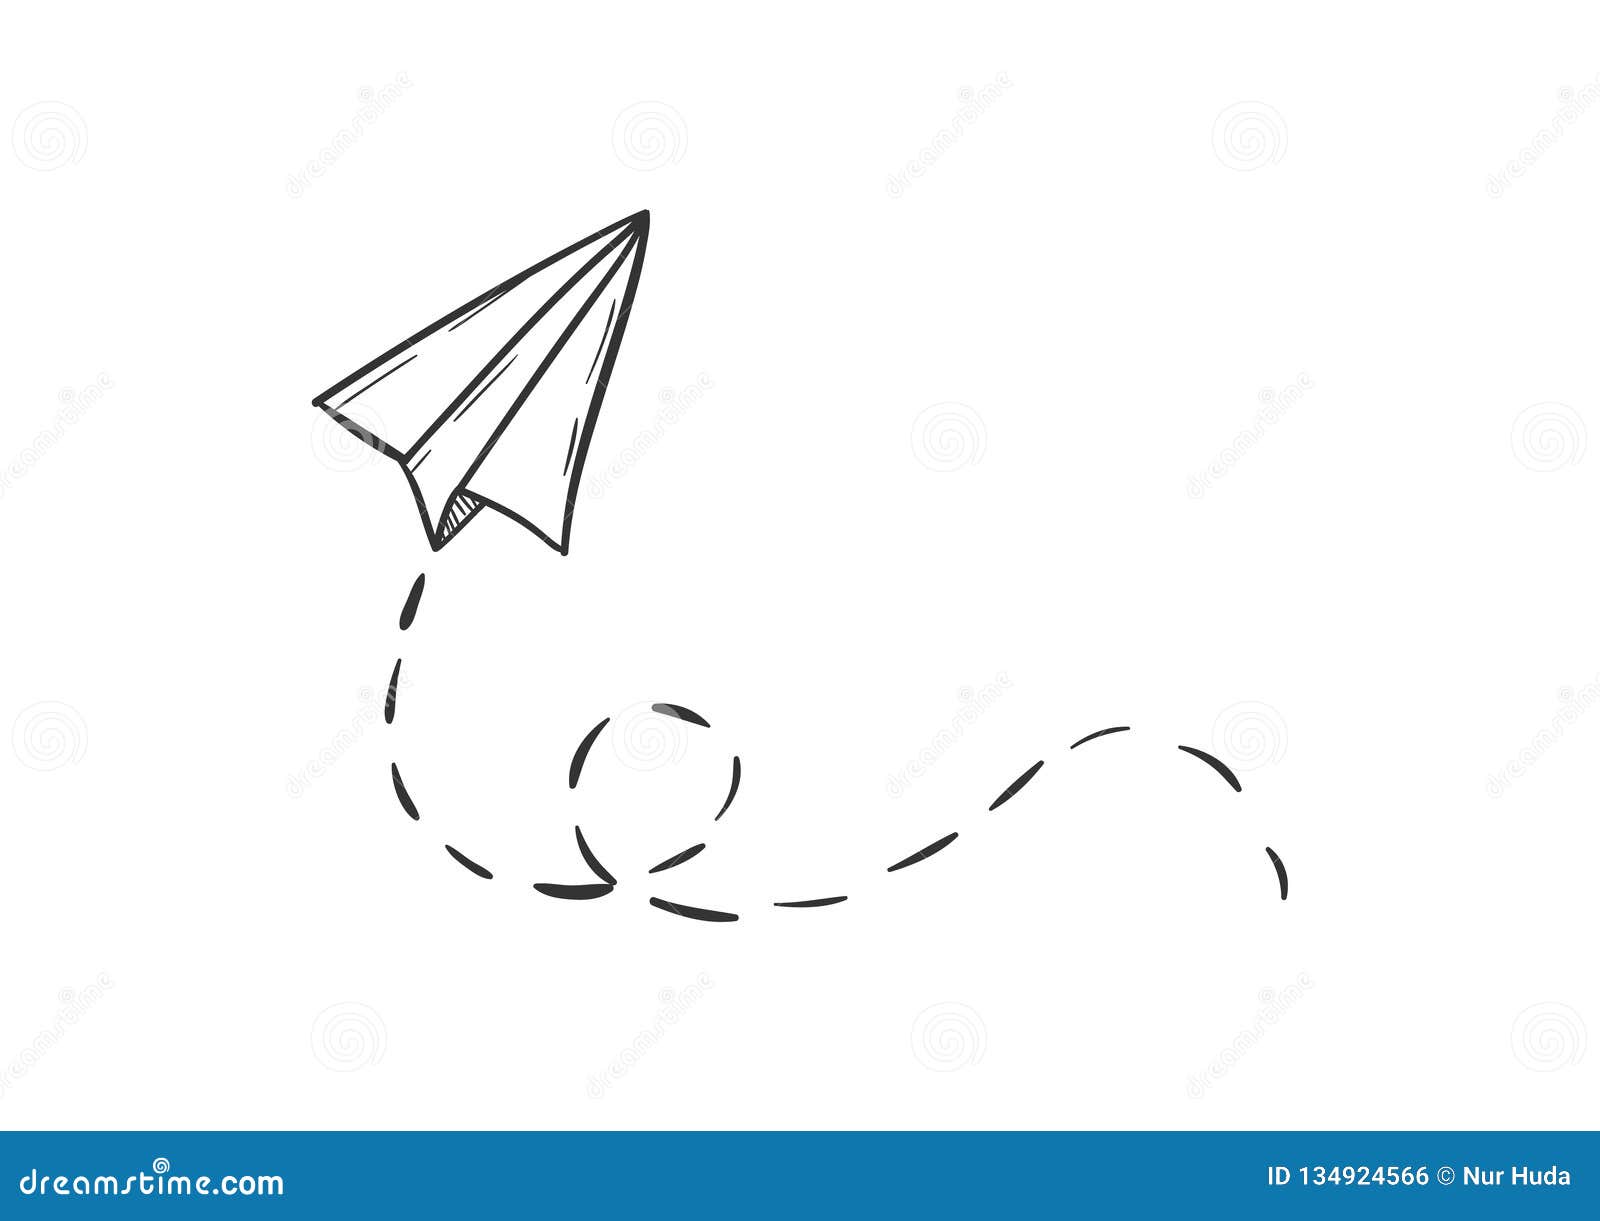 Simple Paper Plane Doodle Style - Isolated Vector Illustration Stock